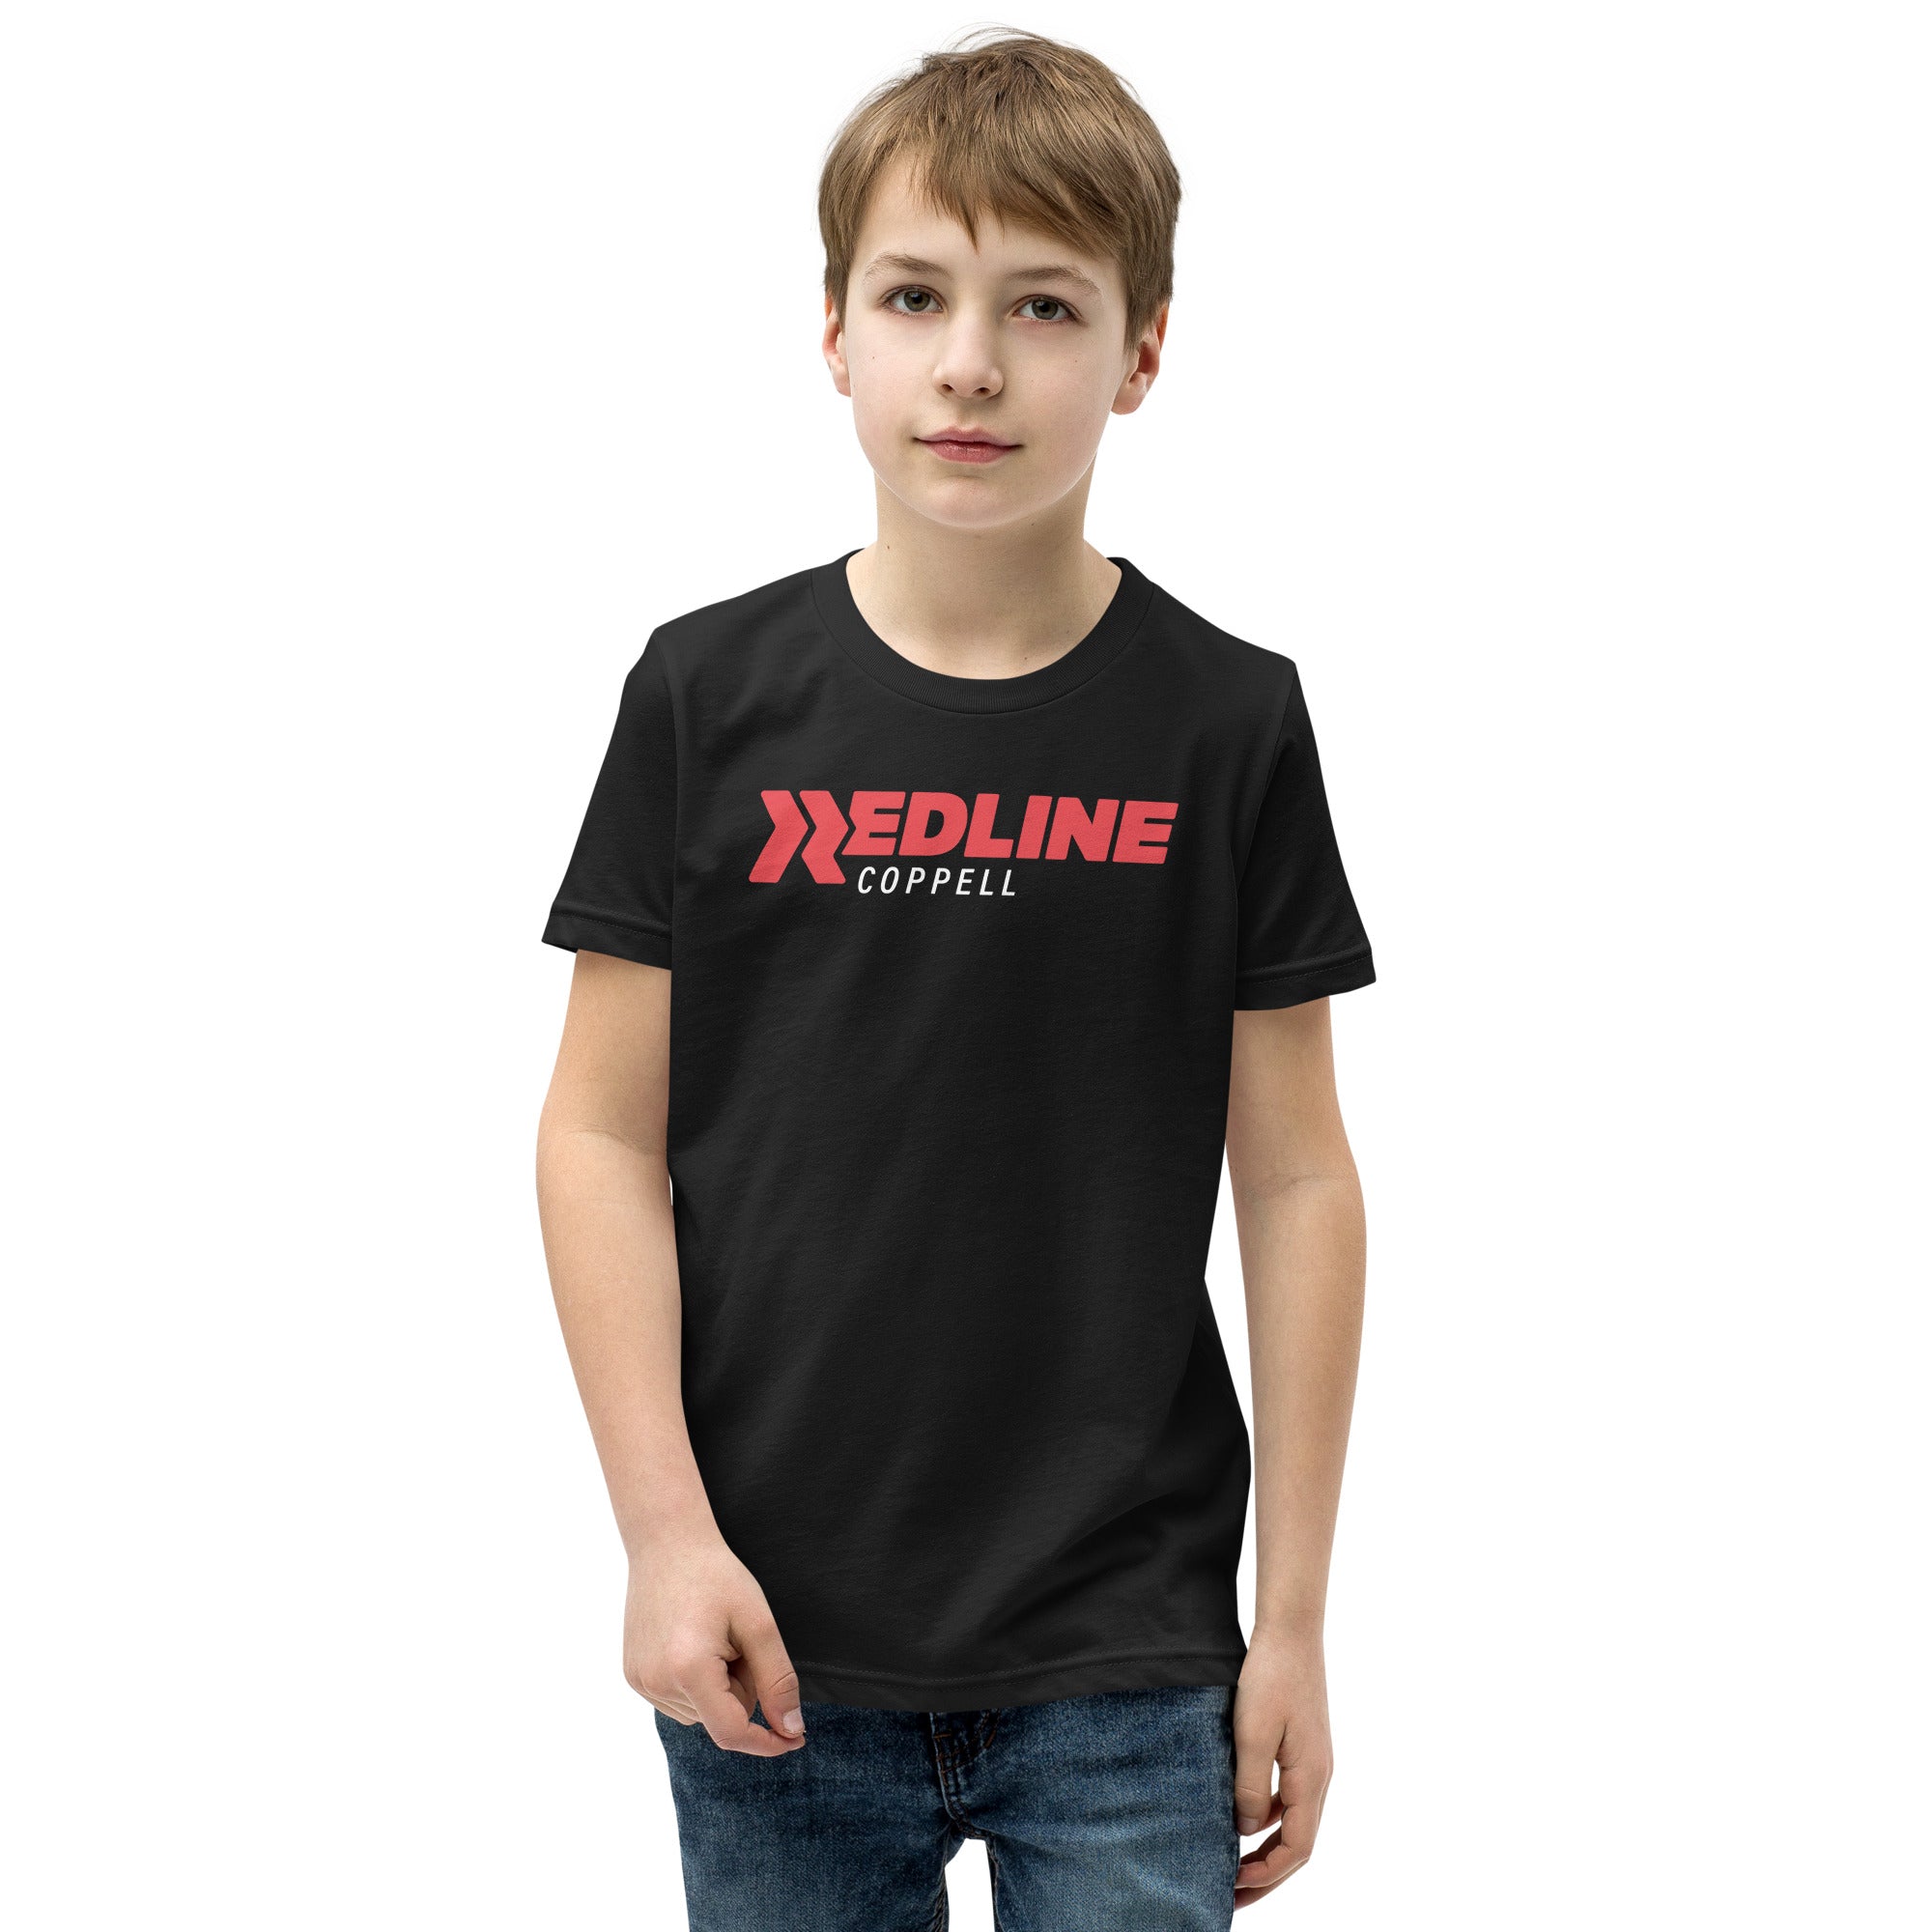 Coppell Logo R/W - Black Youth Short Sleeve T-Shirt